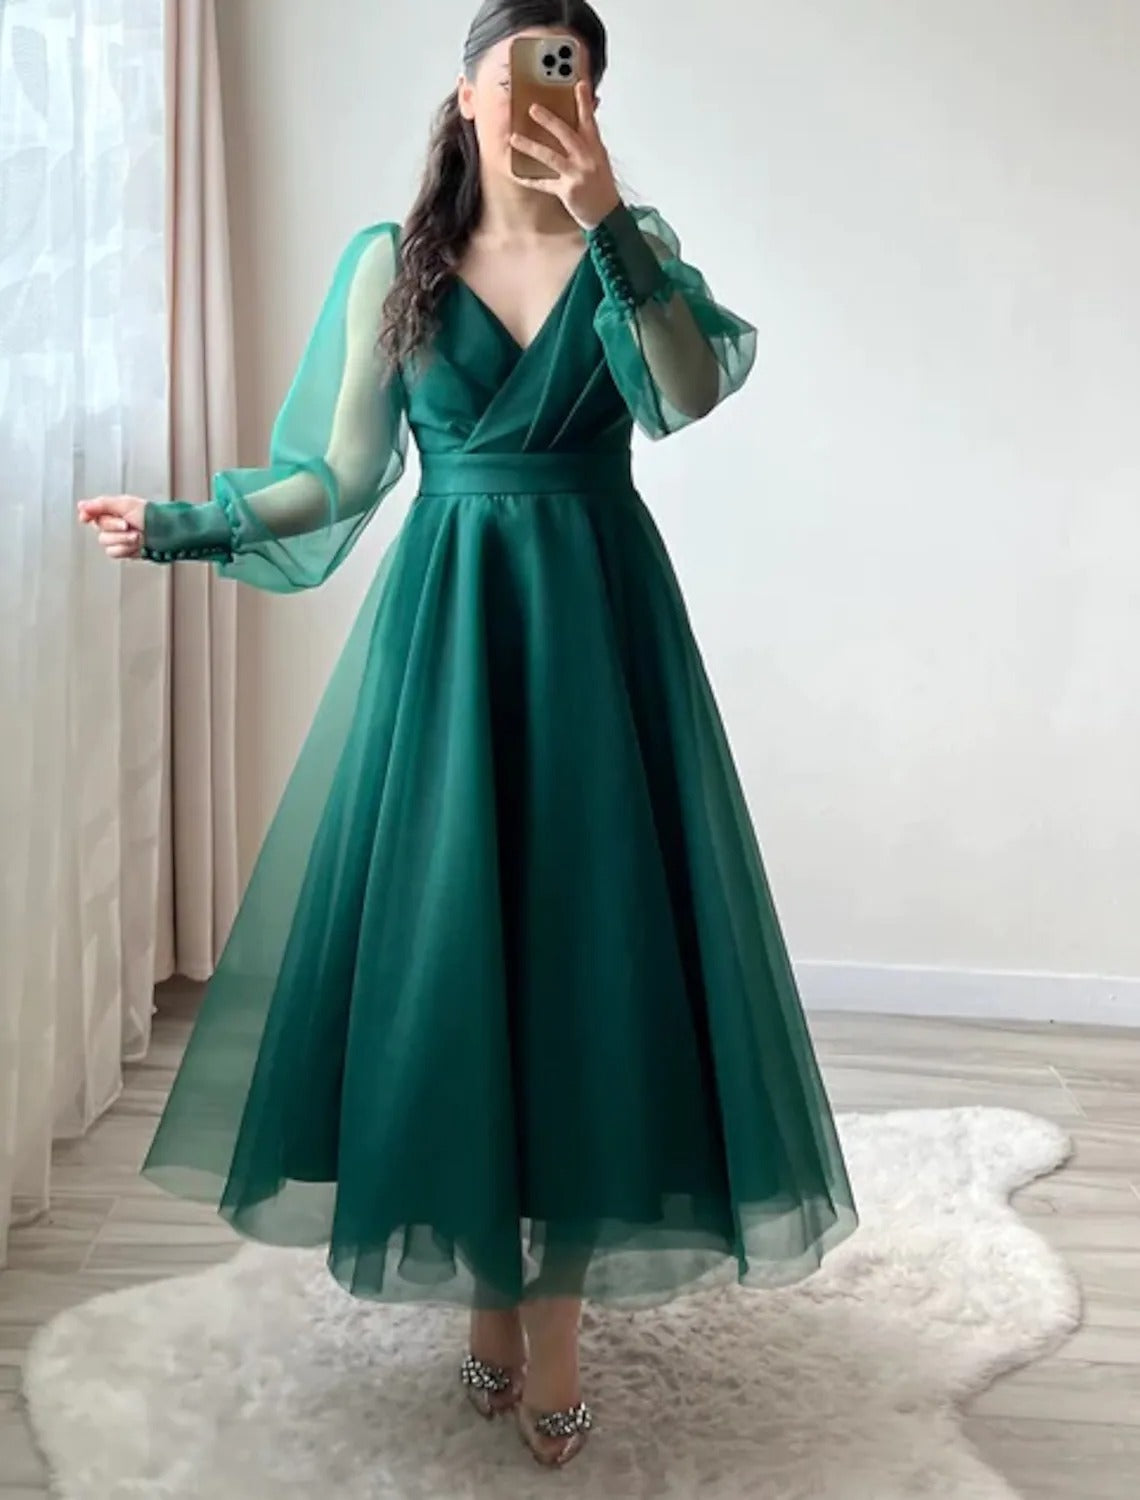 Aggregate more than 83 evening gown with sleeves designs latest